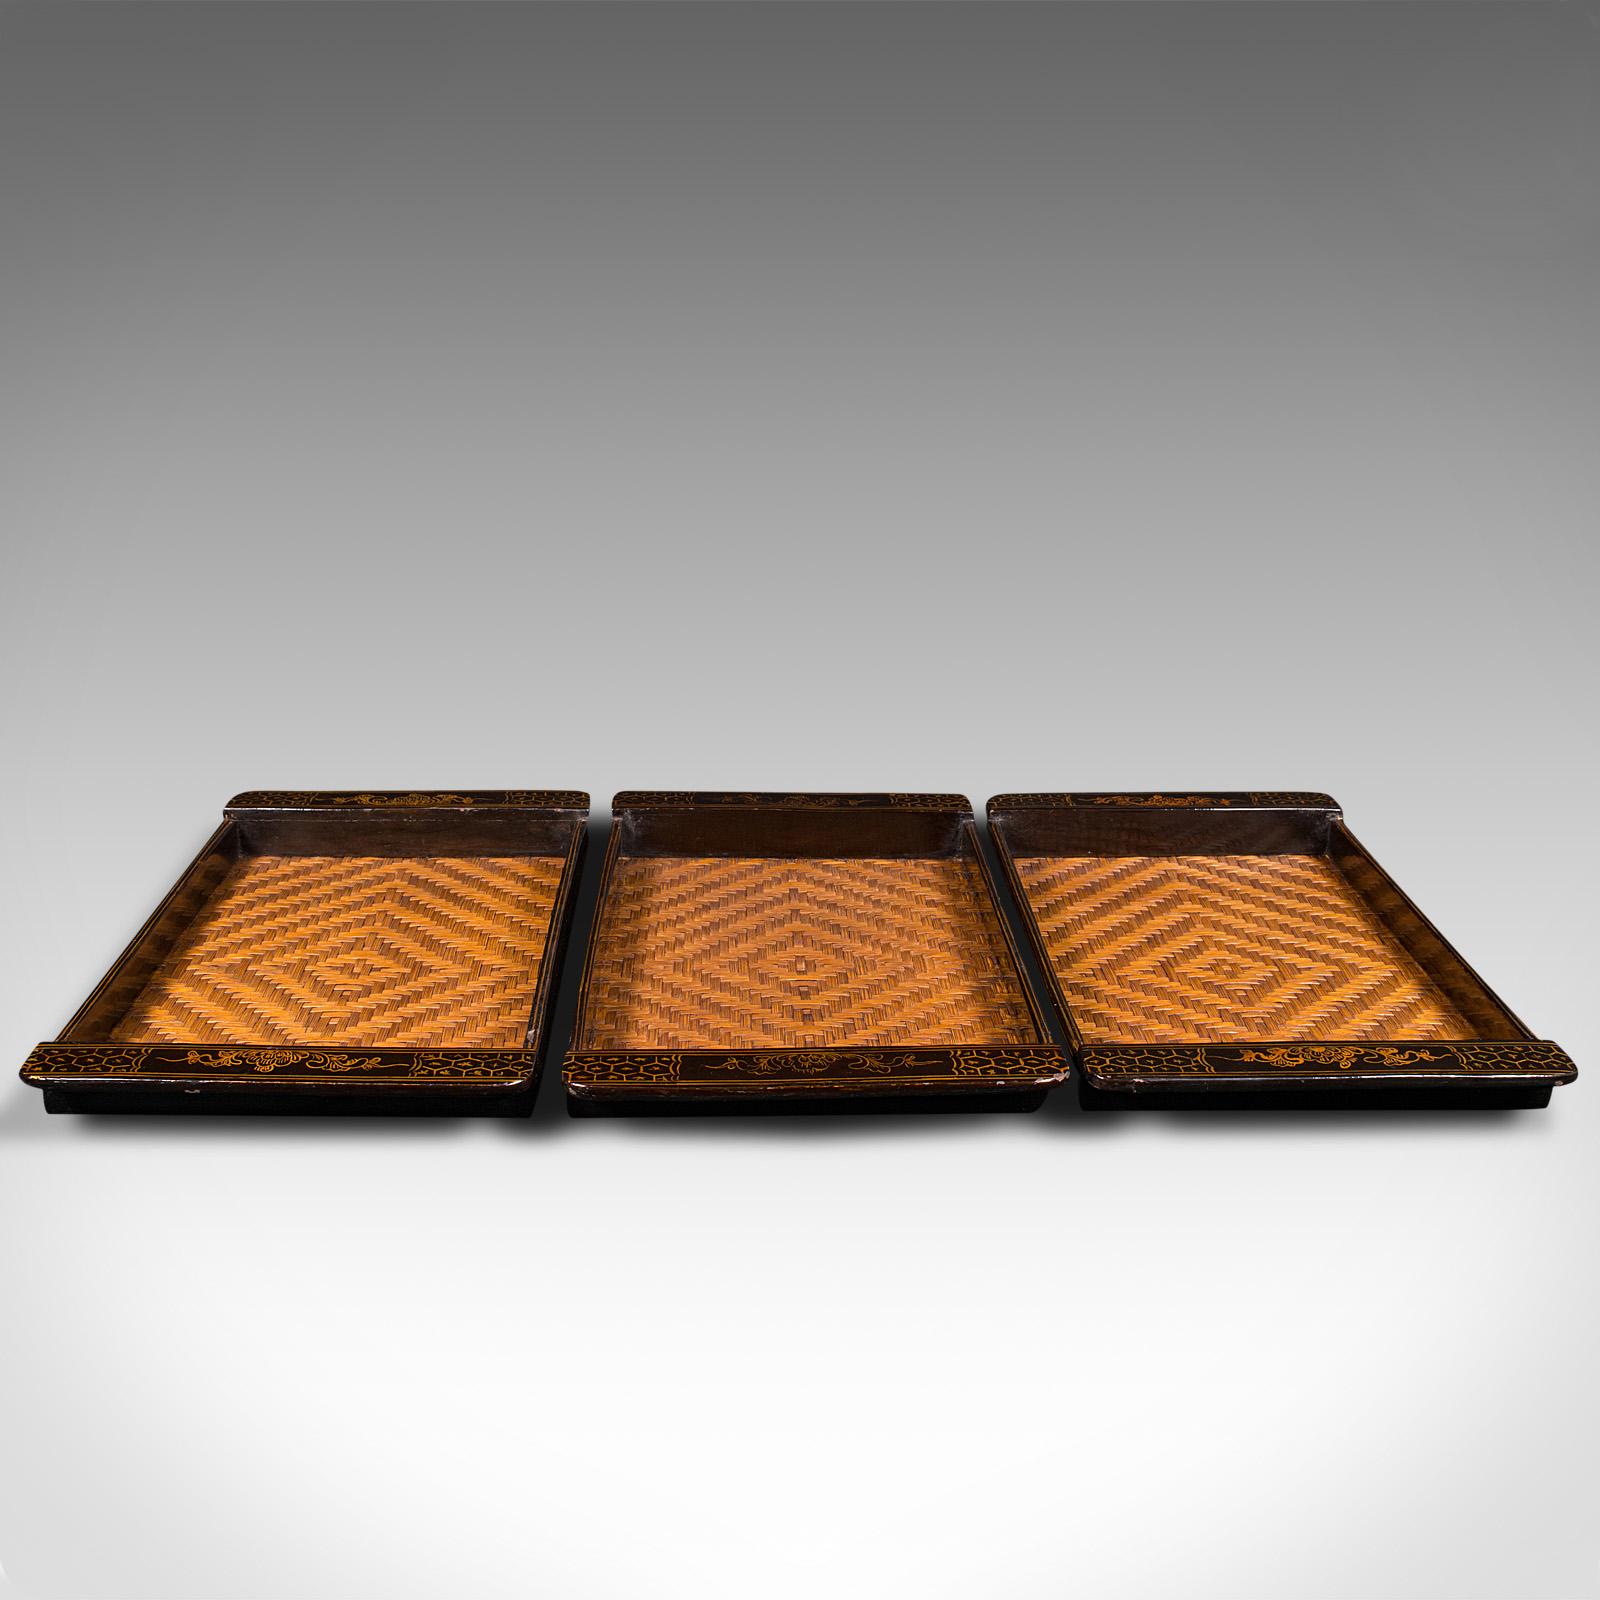 This is a trio of vintage dinner trays. A Japanese, lacquered serving platter with woven bamboo centres, dating to the late Art Deco period, circa 1940.

Vibrant decor across three useful serving trays
Displaying a desirable aged patina and in